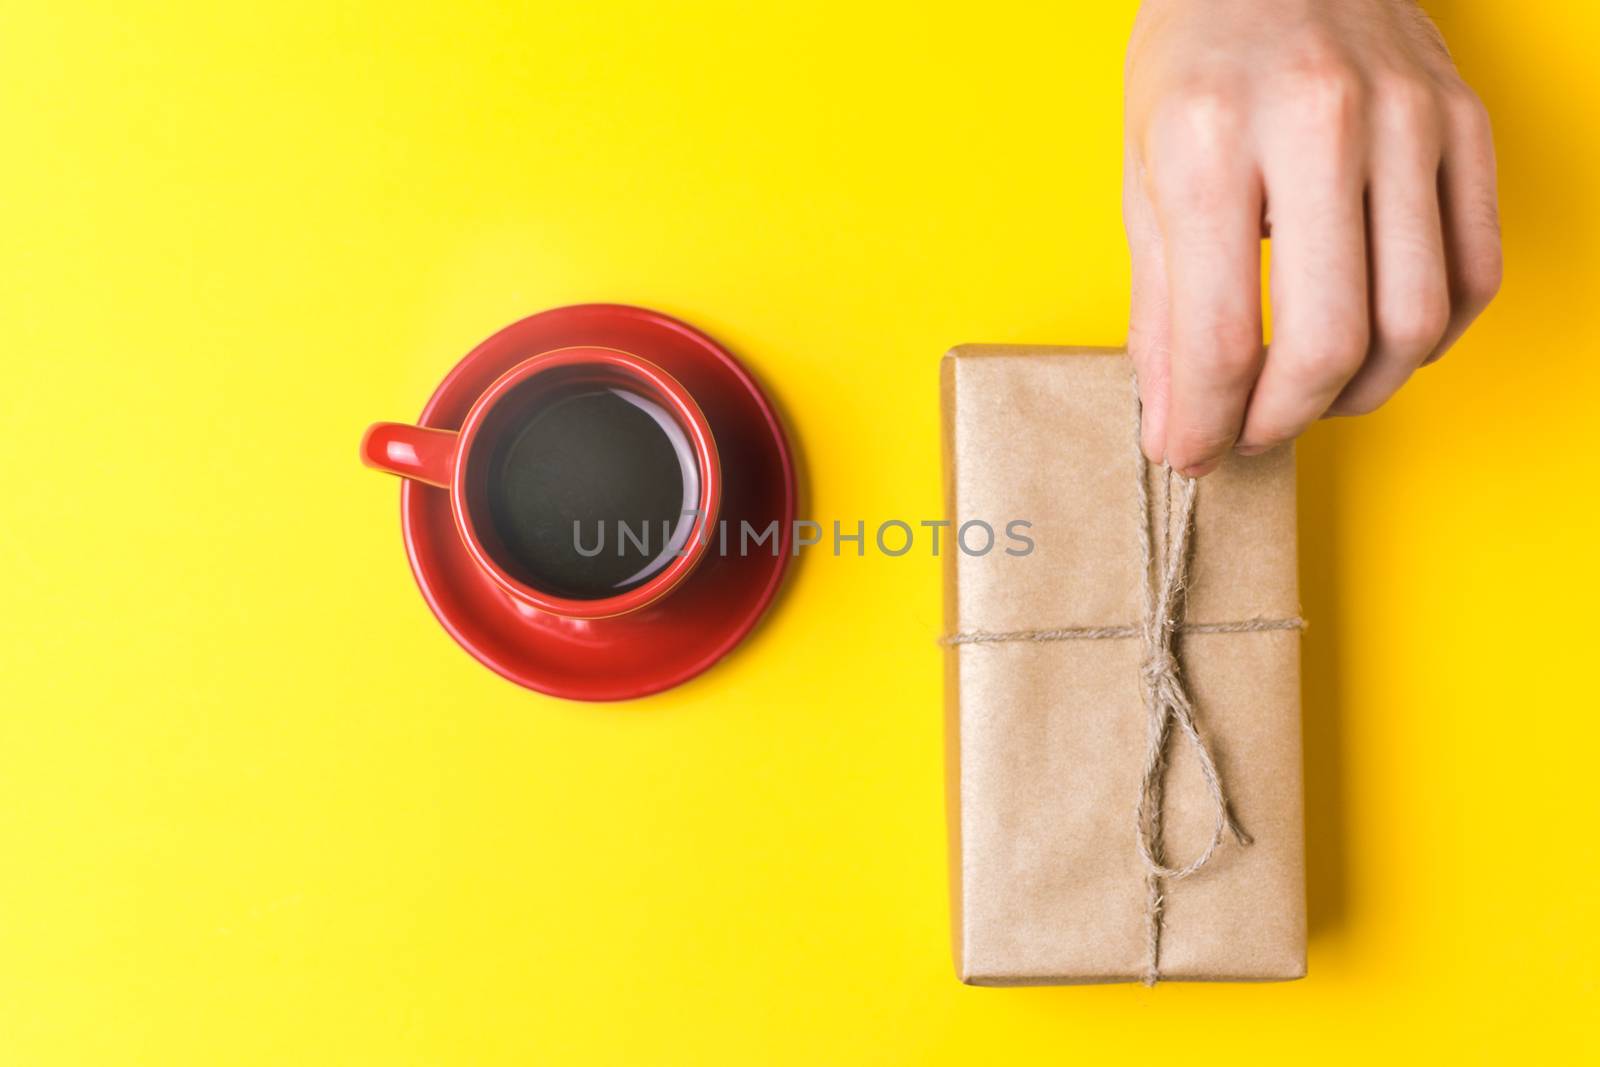 The man pulls a gift to yourself. Still life on yellow background